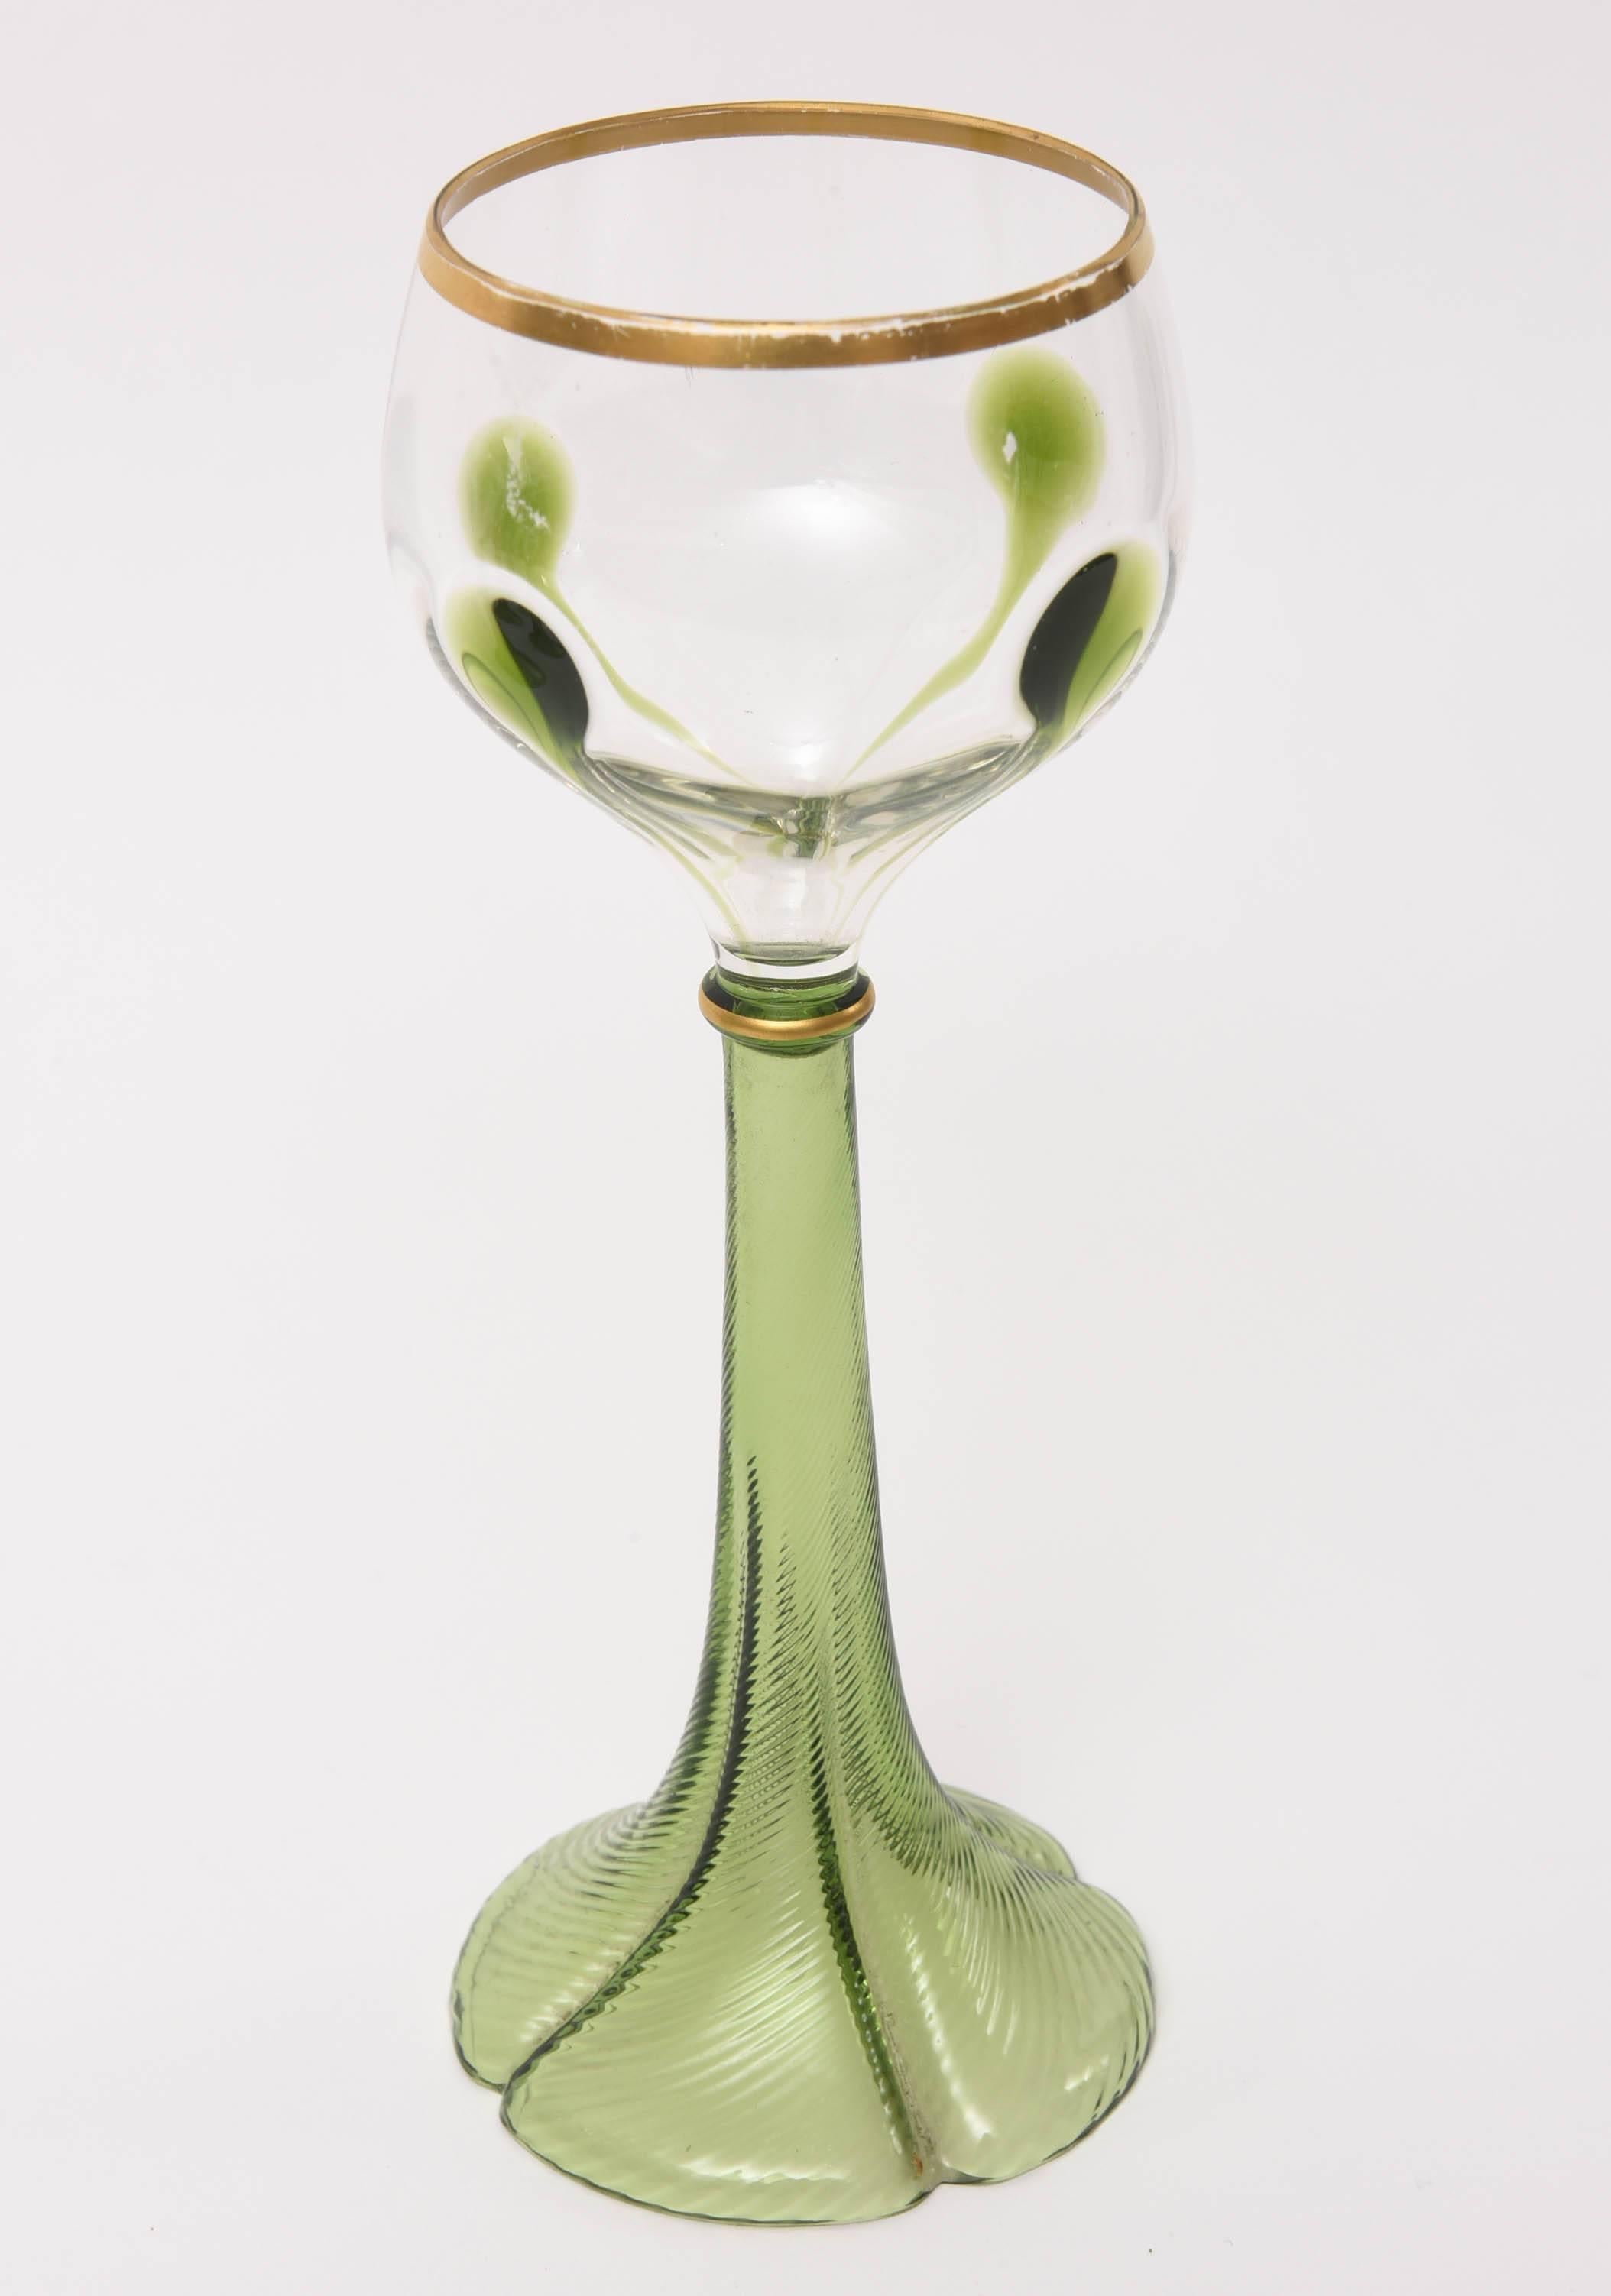 An elegant set of six blown wine goblets with extra applied green design to its bowl. Elaborately shaped stems with hand gilded rims and a well-proportioned overall glass. A classic art nouveau look with the teeniest of wear. Ready to mix and match